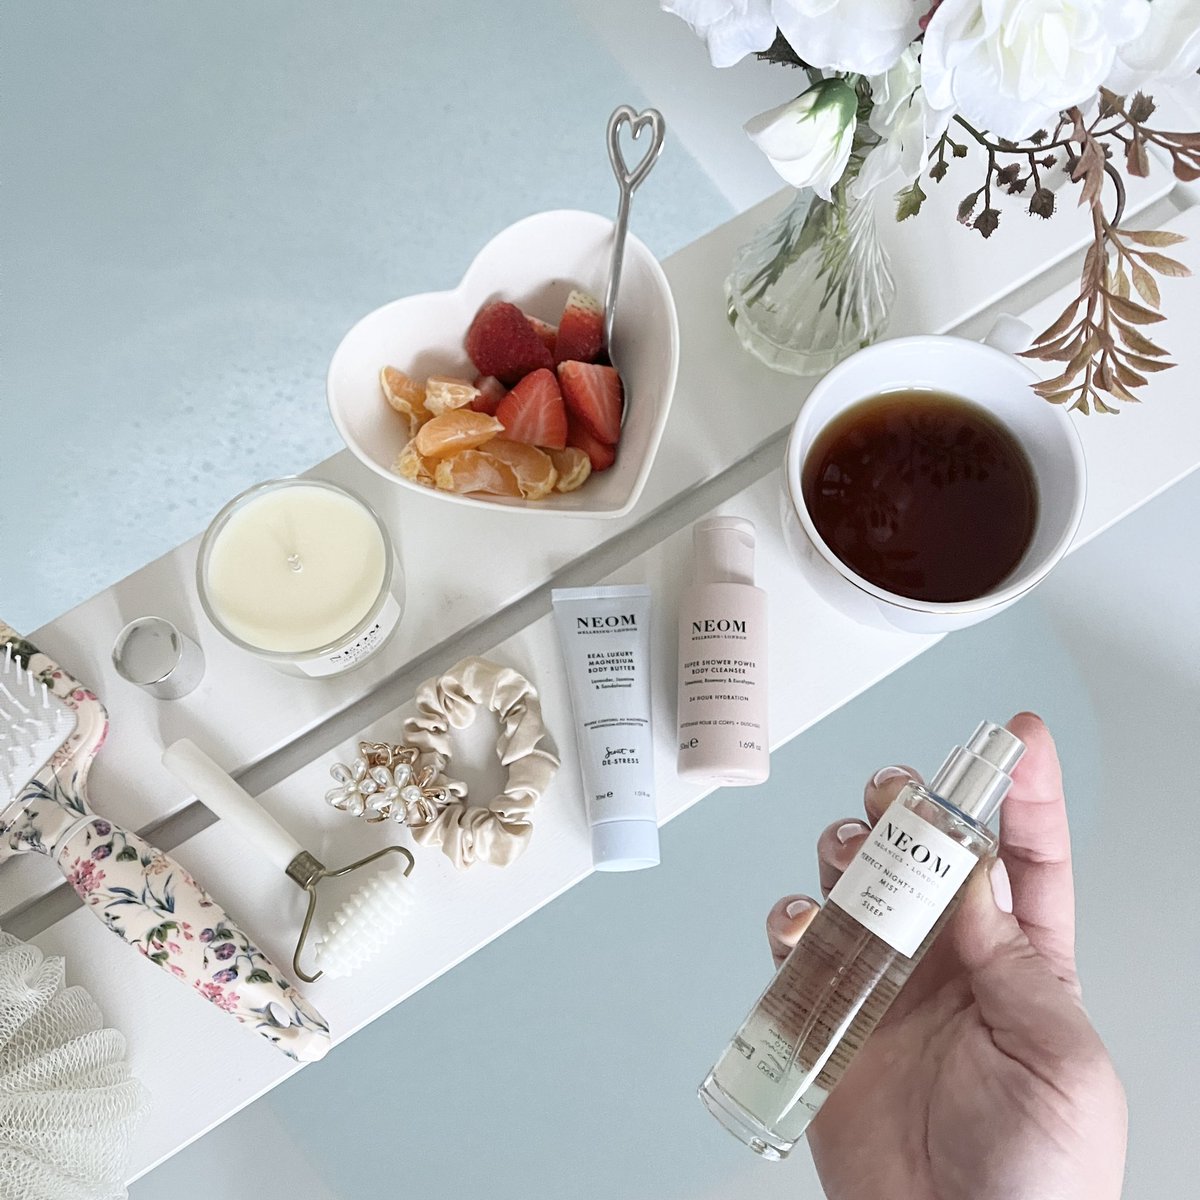 🫧 AD | Sleep better with this essential oils filled wellbeing goodies by @neomorganics 🥰

Say bye to sleepless night with this Pillow Mist. 20% off Neom Organics 👉🏻 community.neomorganics.com/s/cinmi 🛍️

🏷️ #BBloggersUK #BathAndBody #UKLifestyleBlogger #SelfcareRoutine